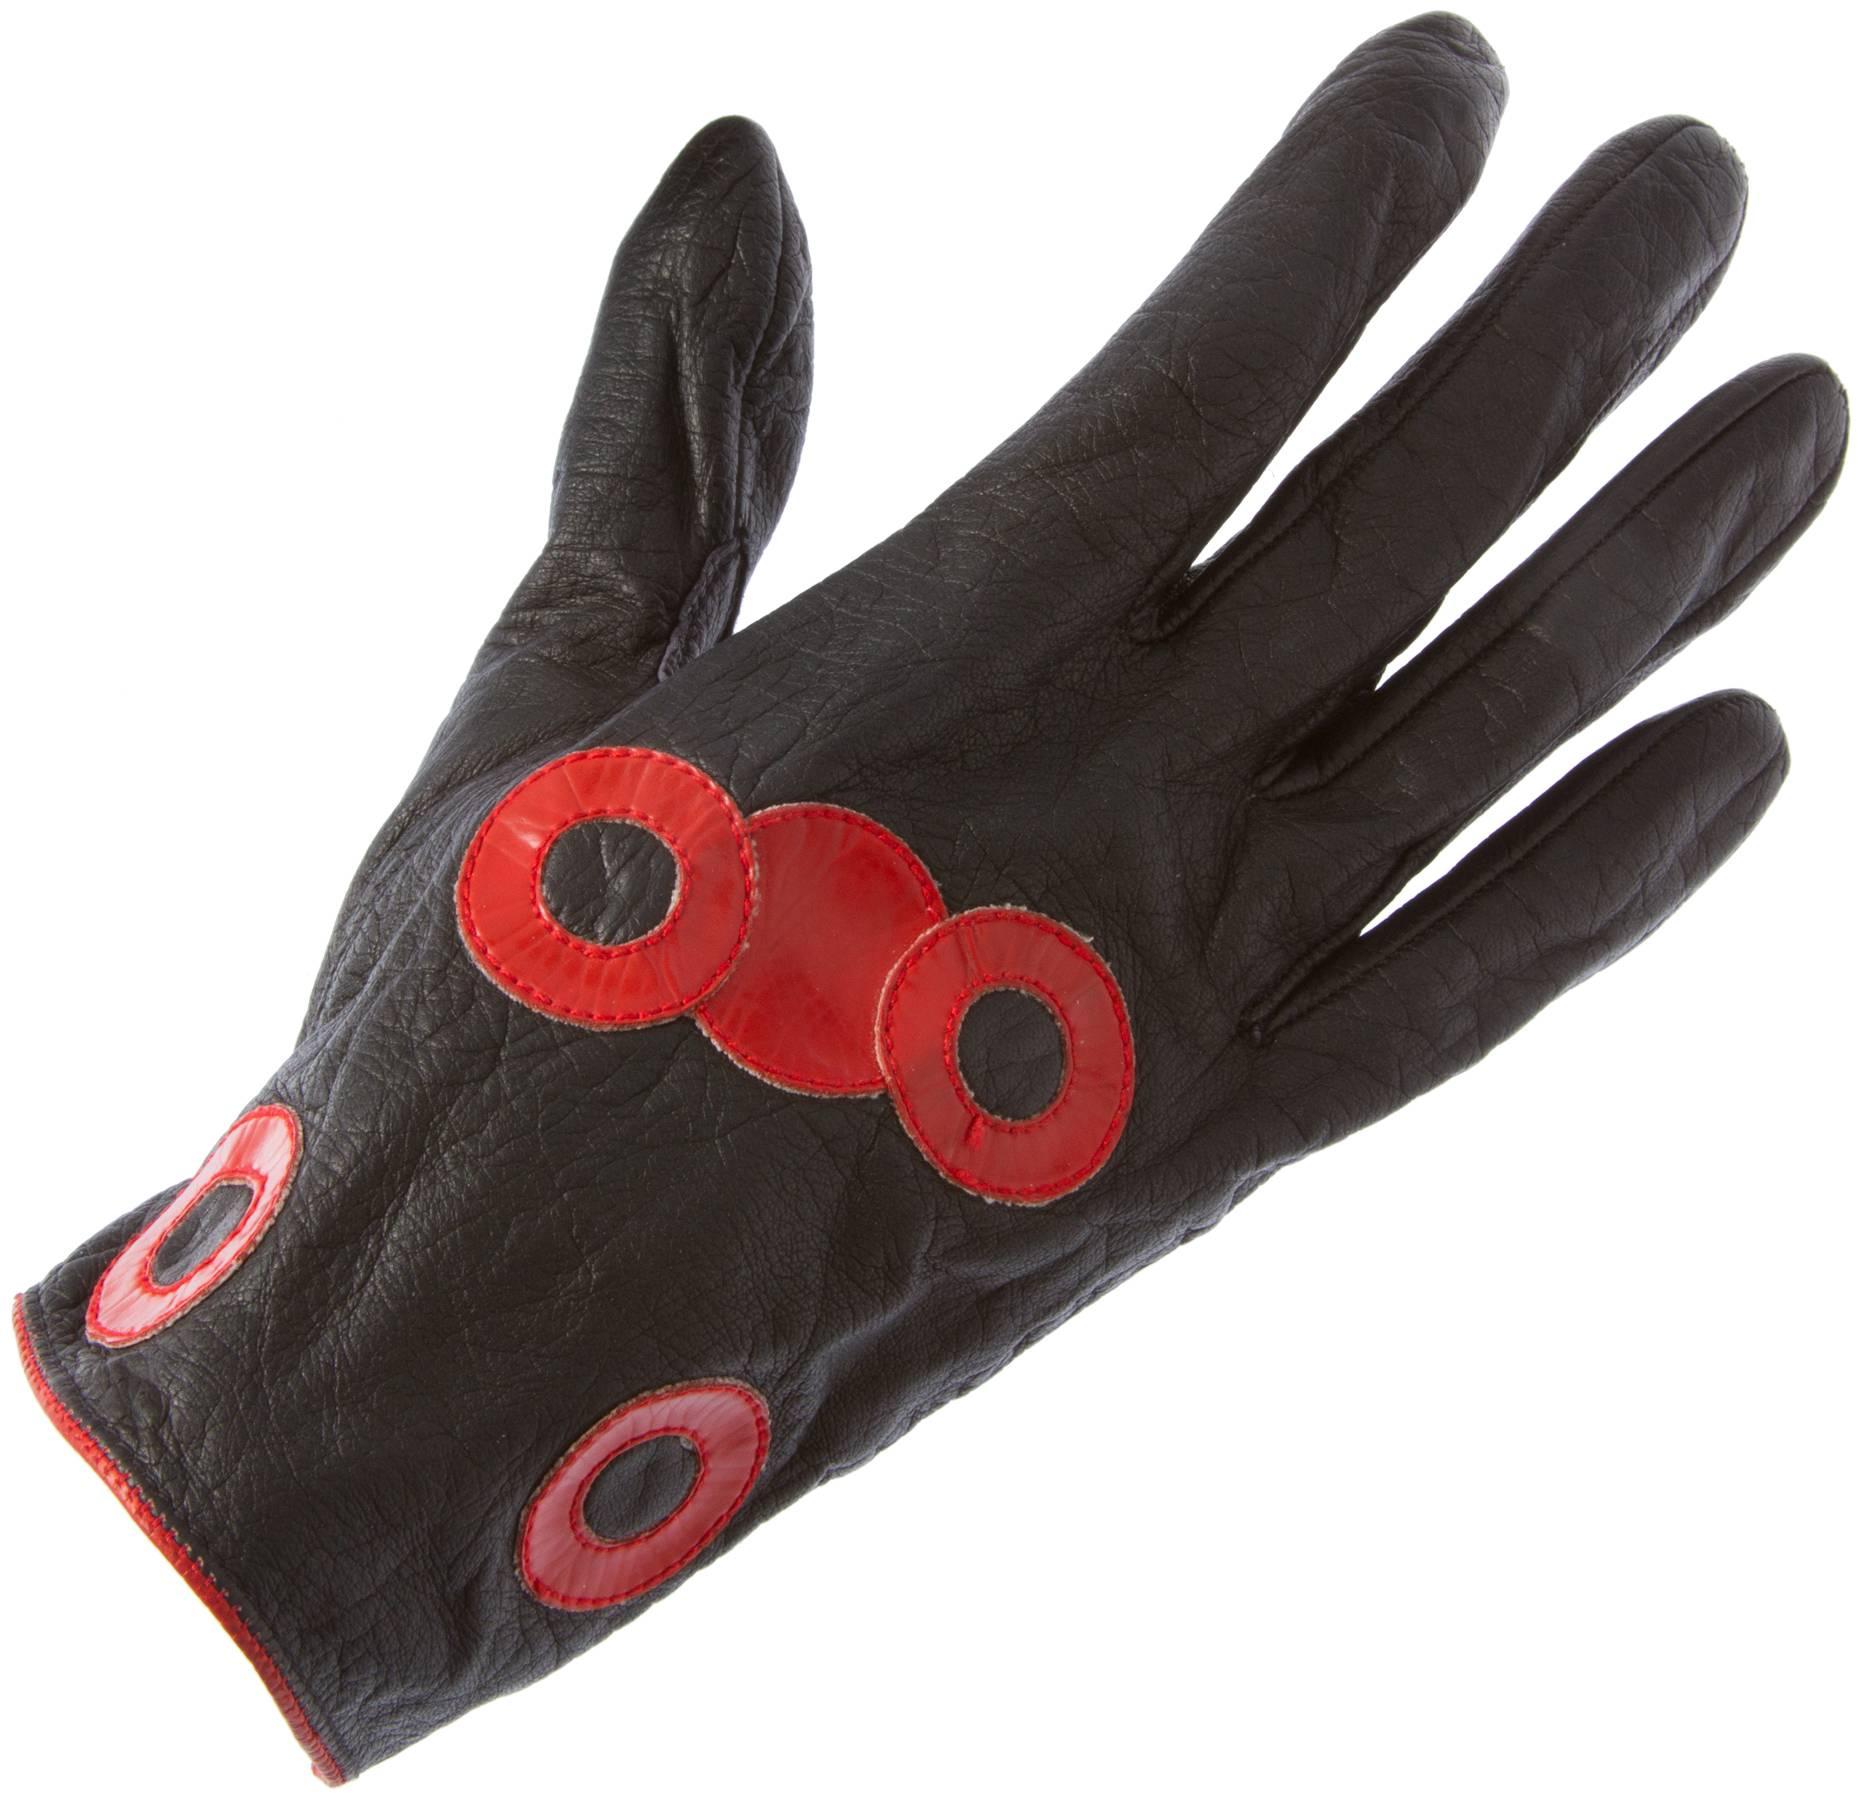 These are fun vintage smaller gloves.  Black with red appliques.